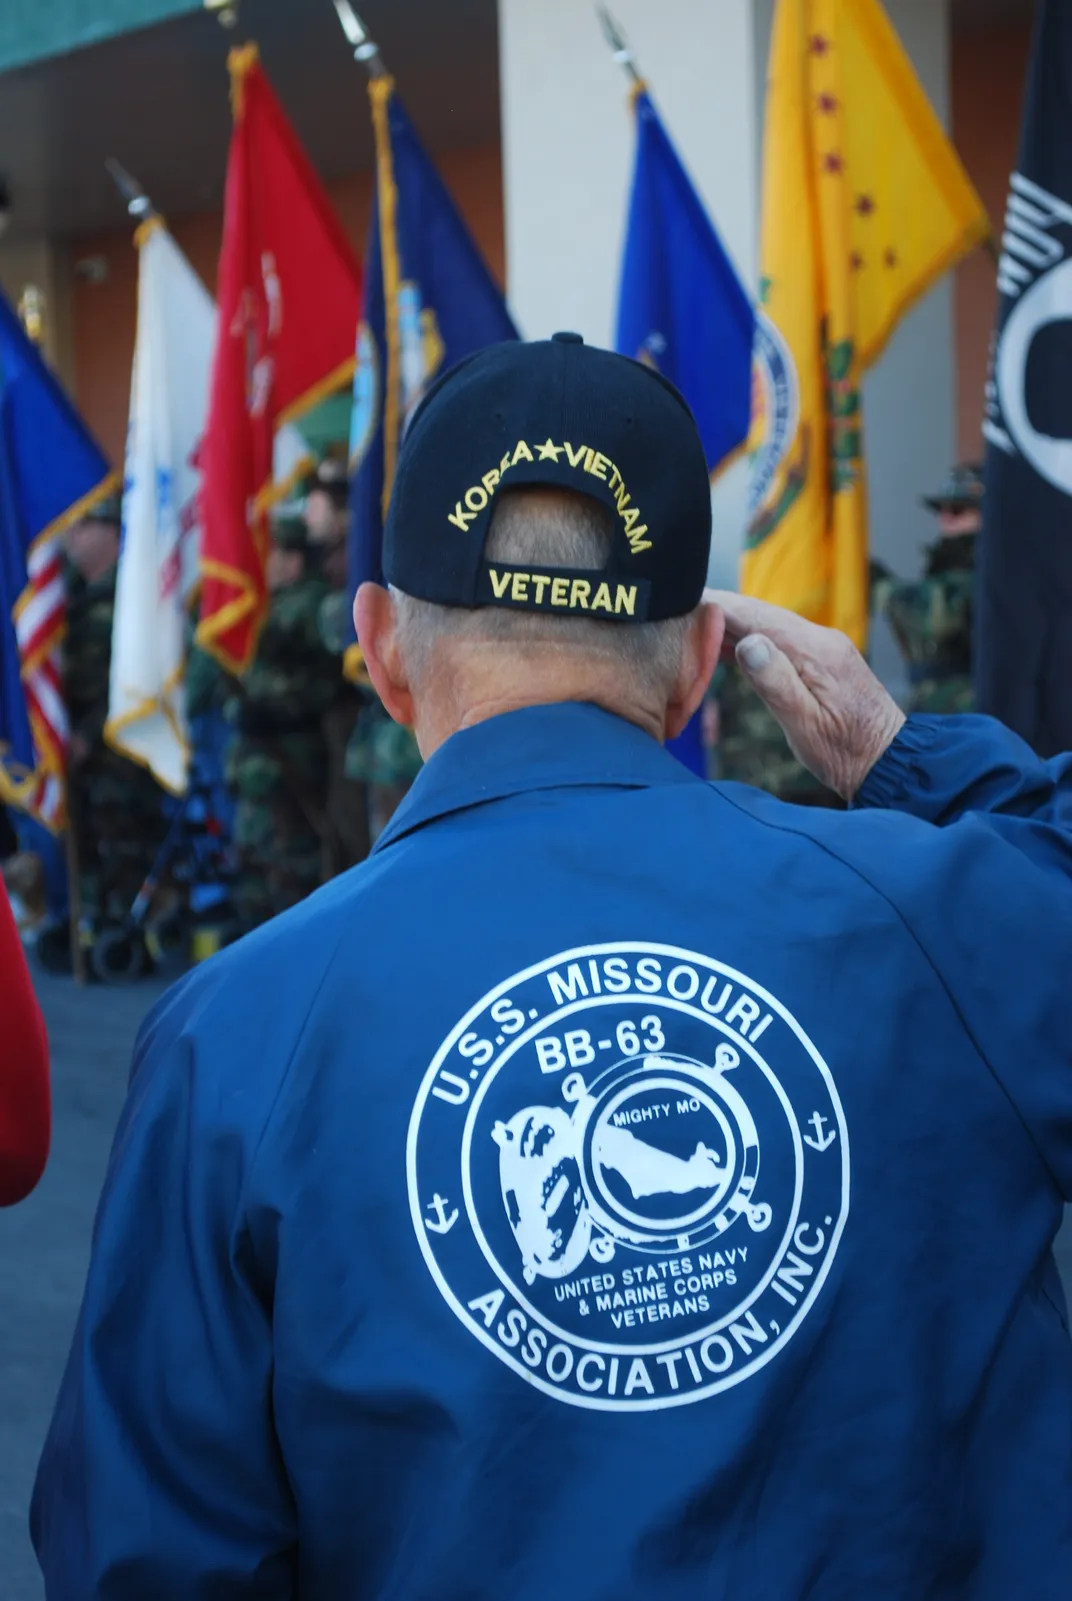 the back of a man is shown as he salute's a row of flags